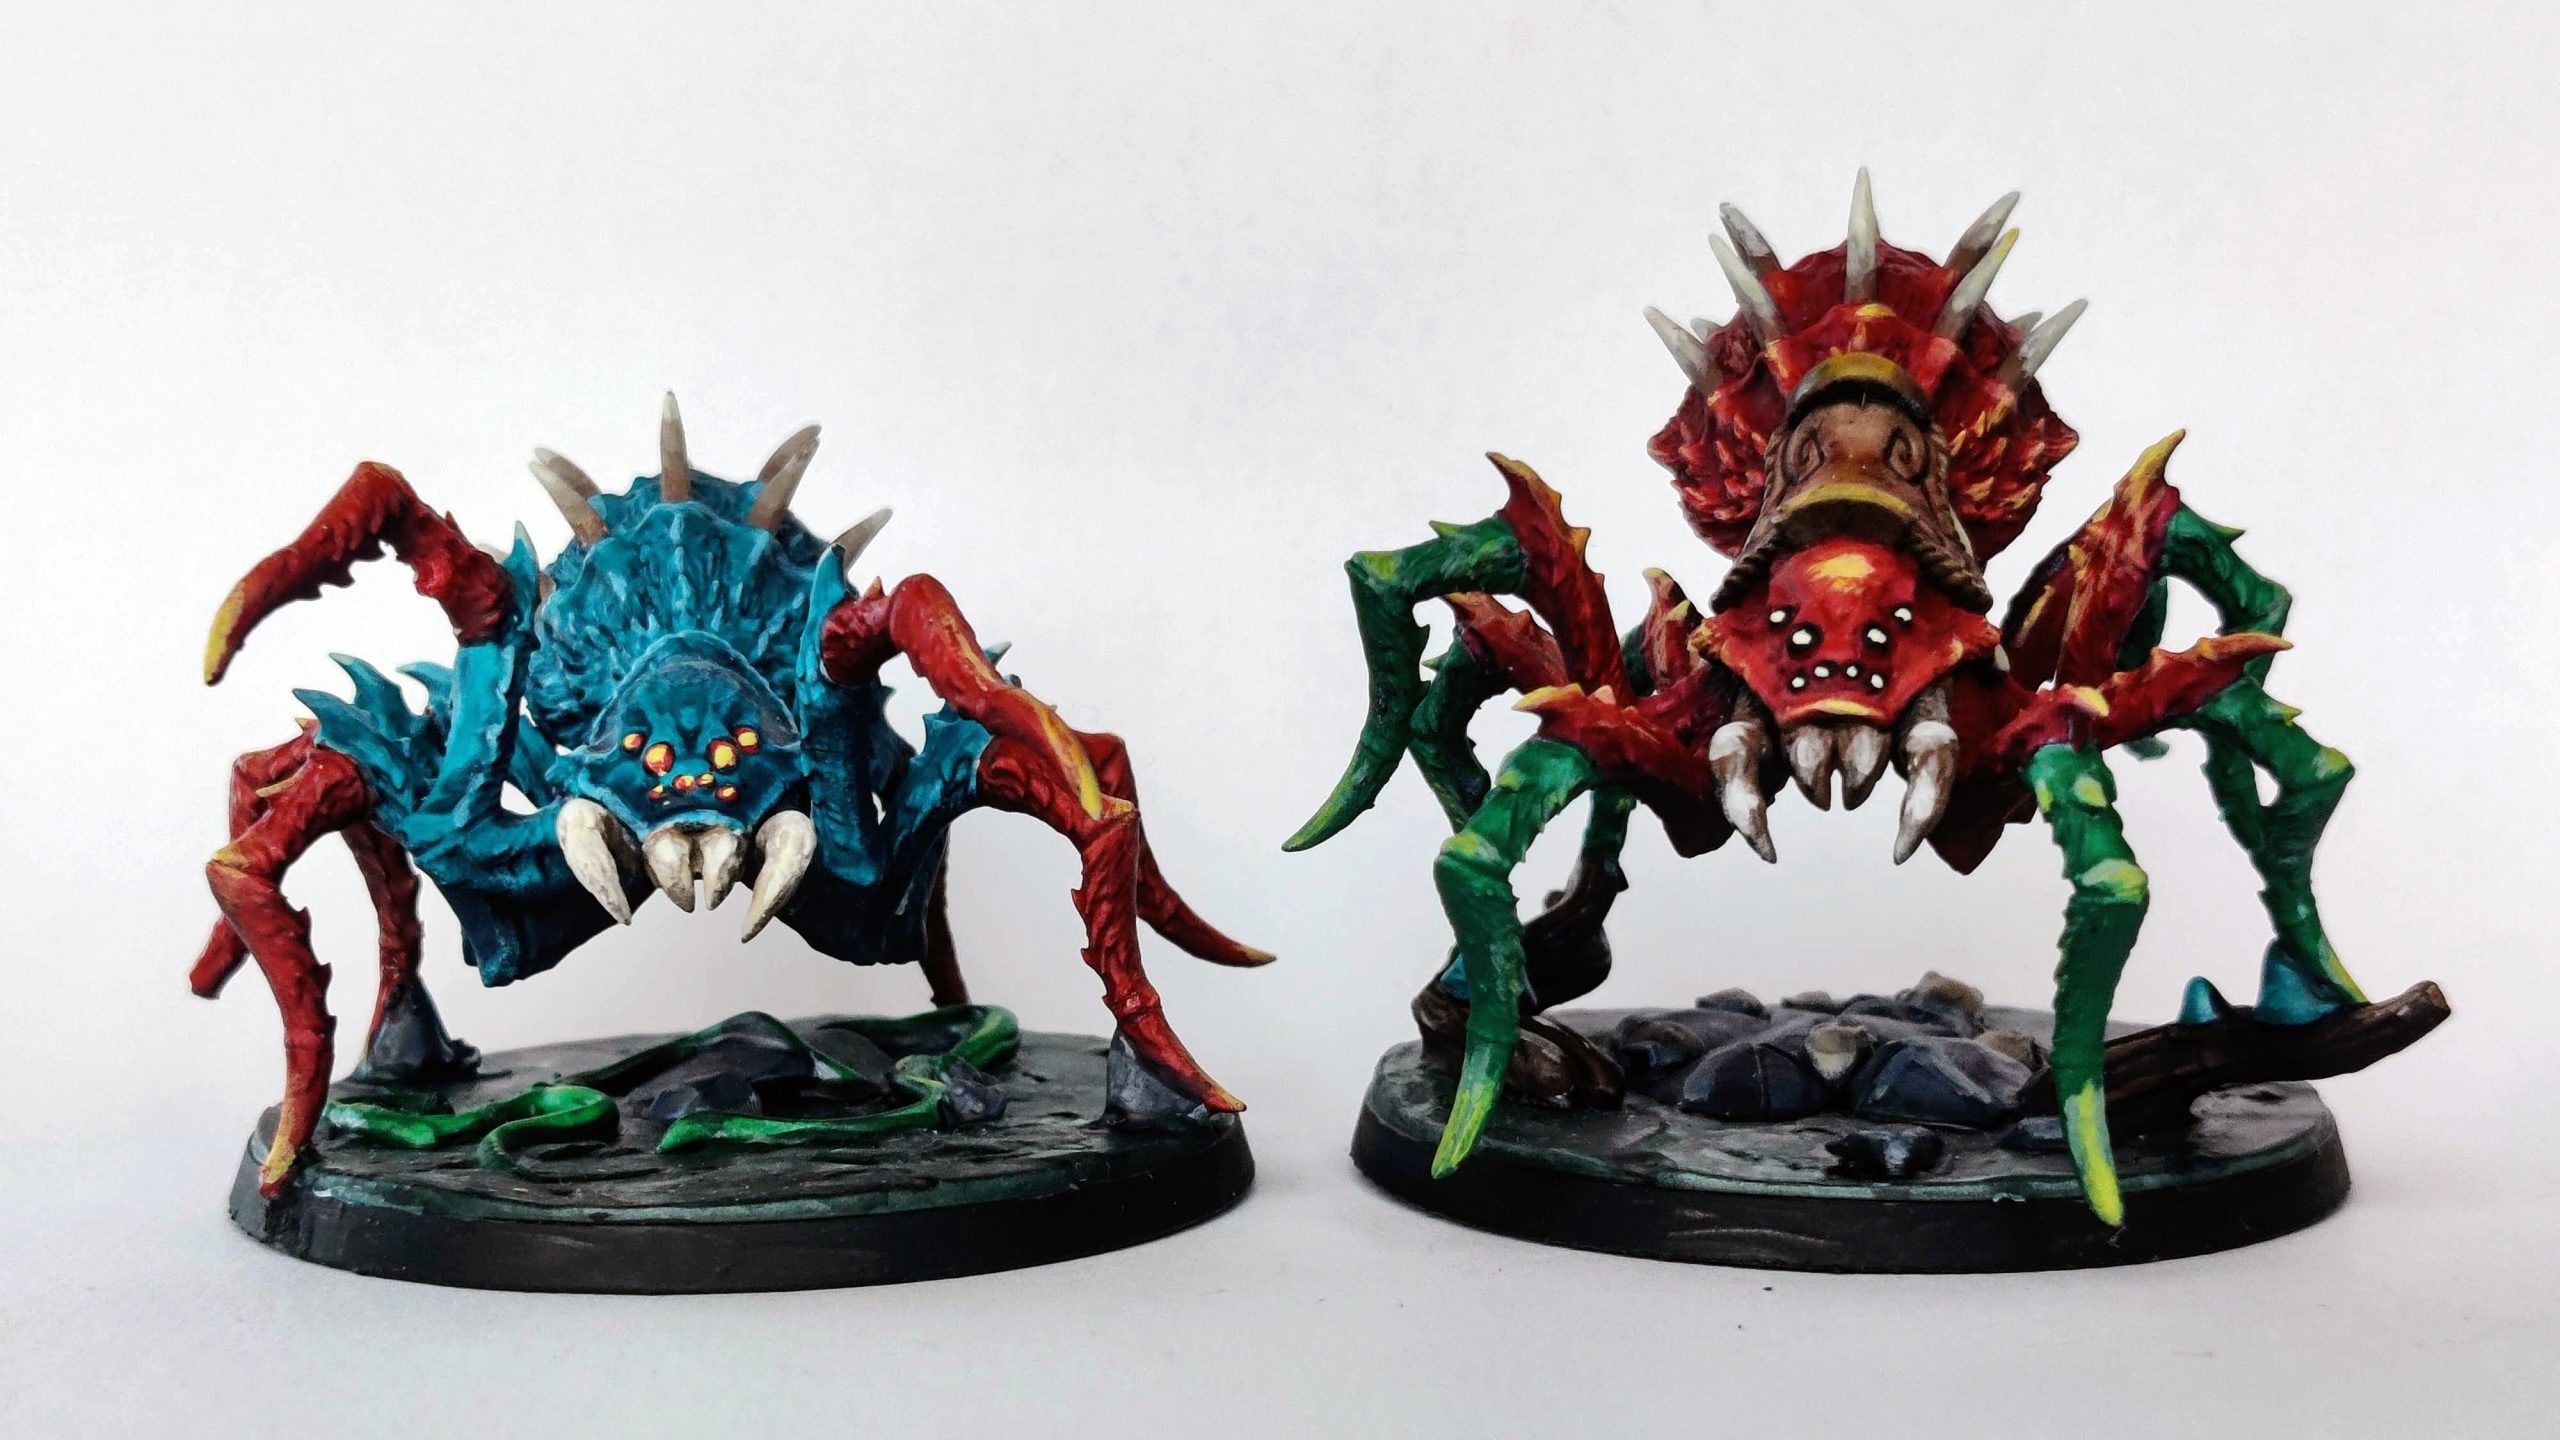 Two spiders from the Faldorn Goblins set by Artisan Guild. Printed on an Elegoo Saturn 2, painted with Speedpaints 2.0, and highlighted with Warpaints.